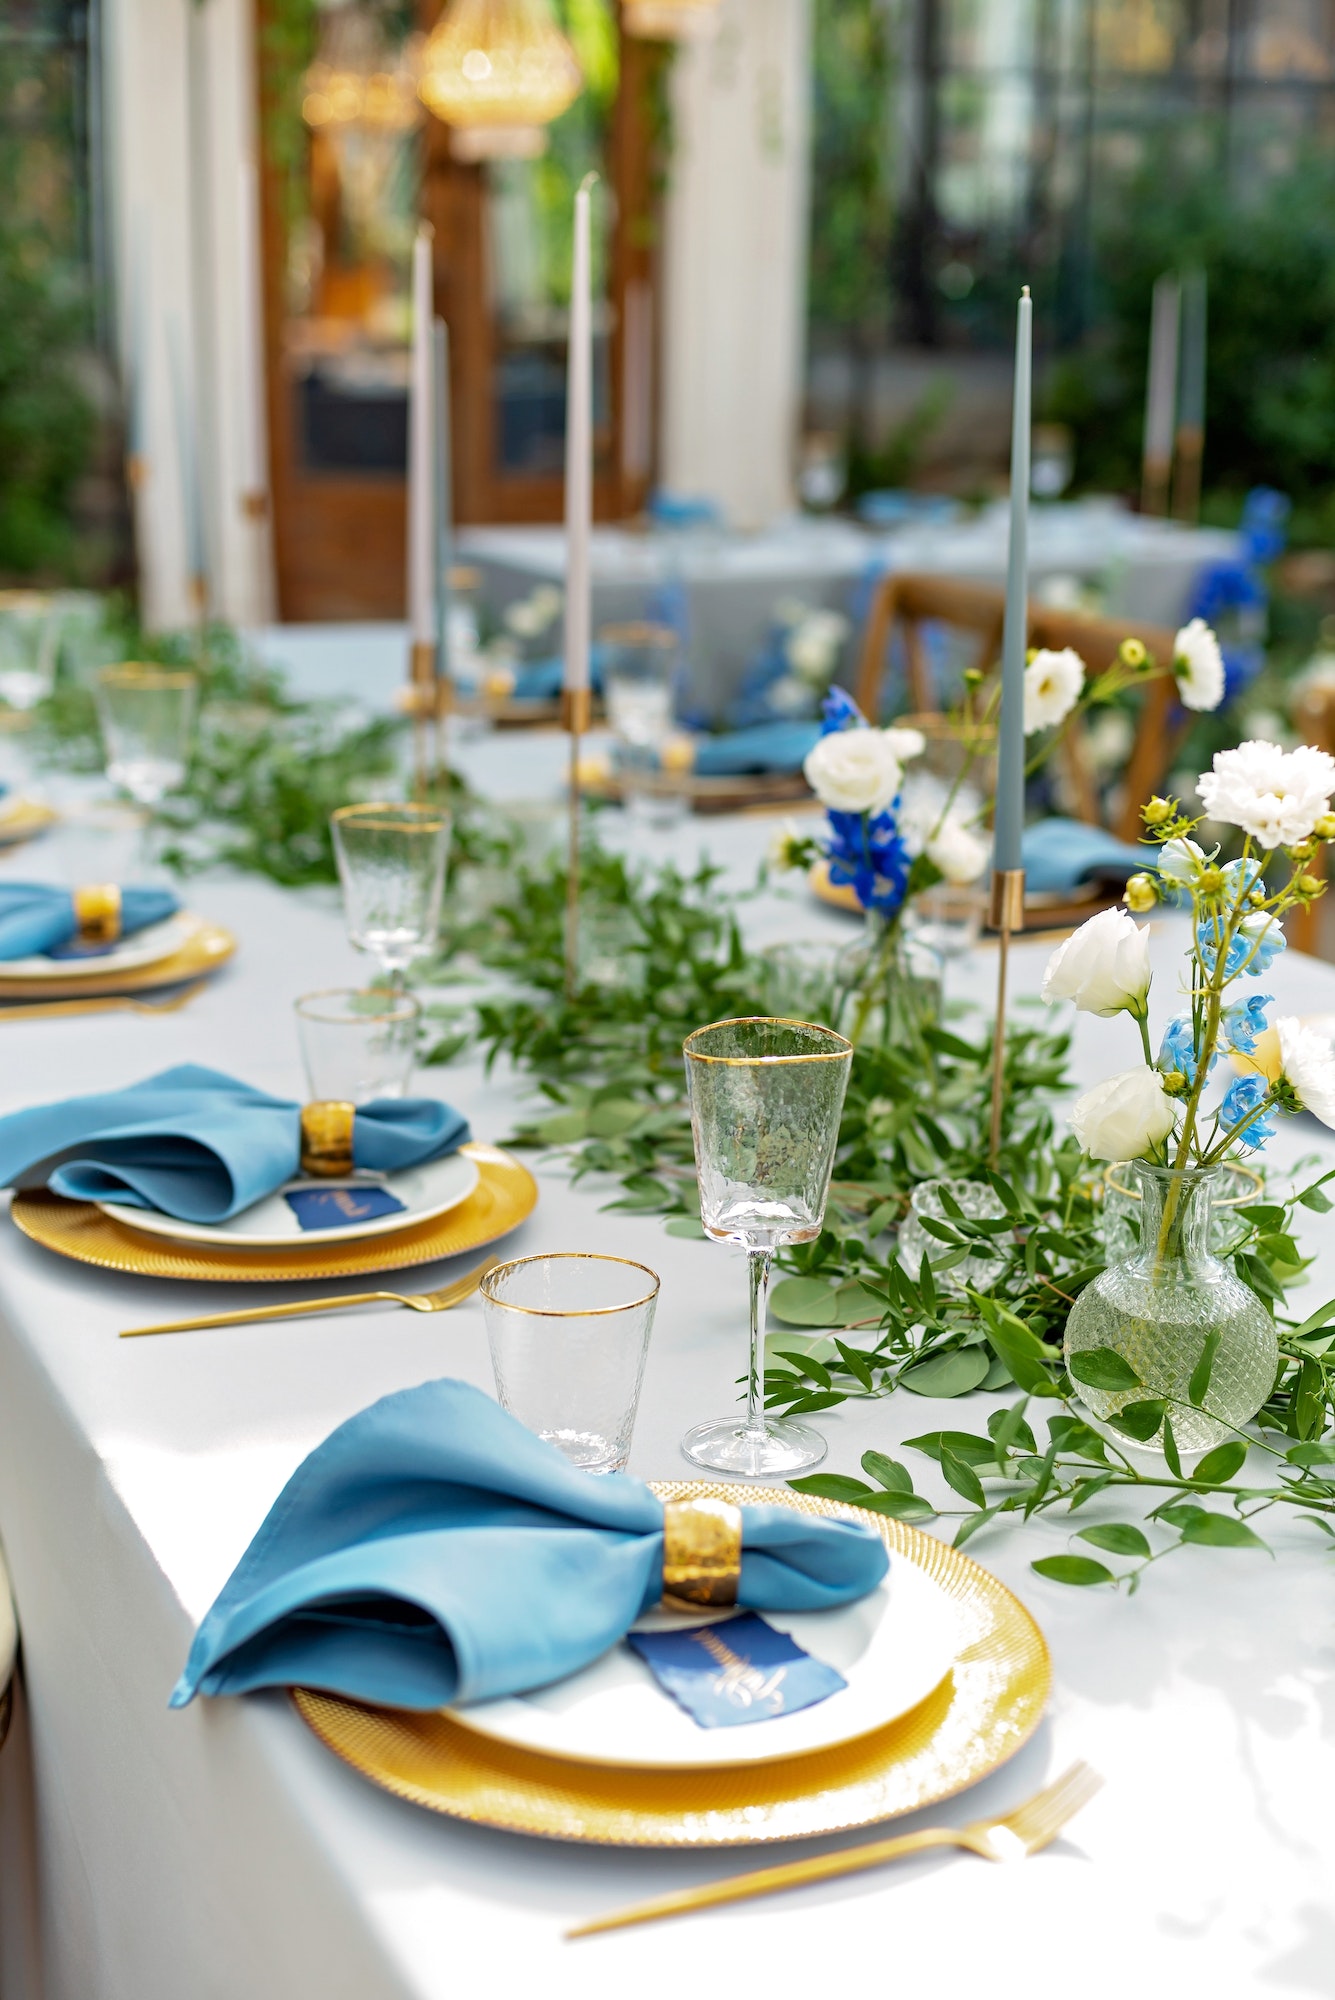 Banquet wedding table setting with blue napkins, gold cutlery, crystal, fresh flowers and candles.